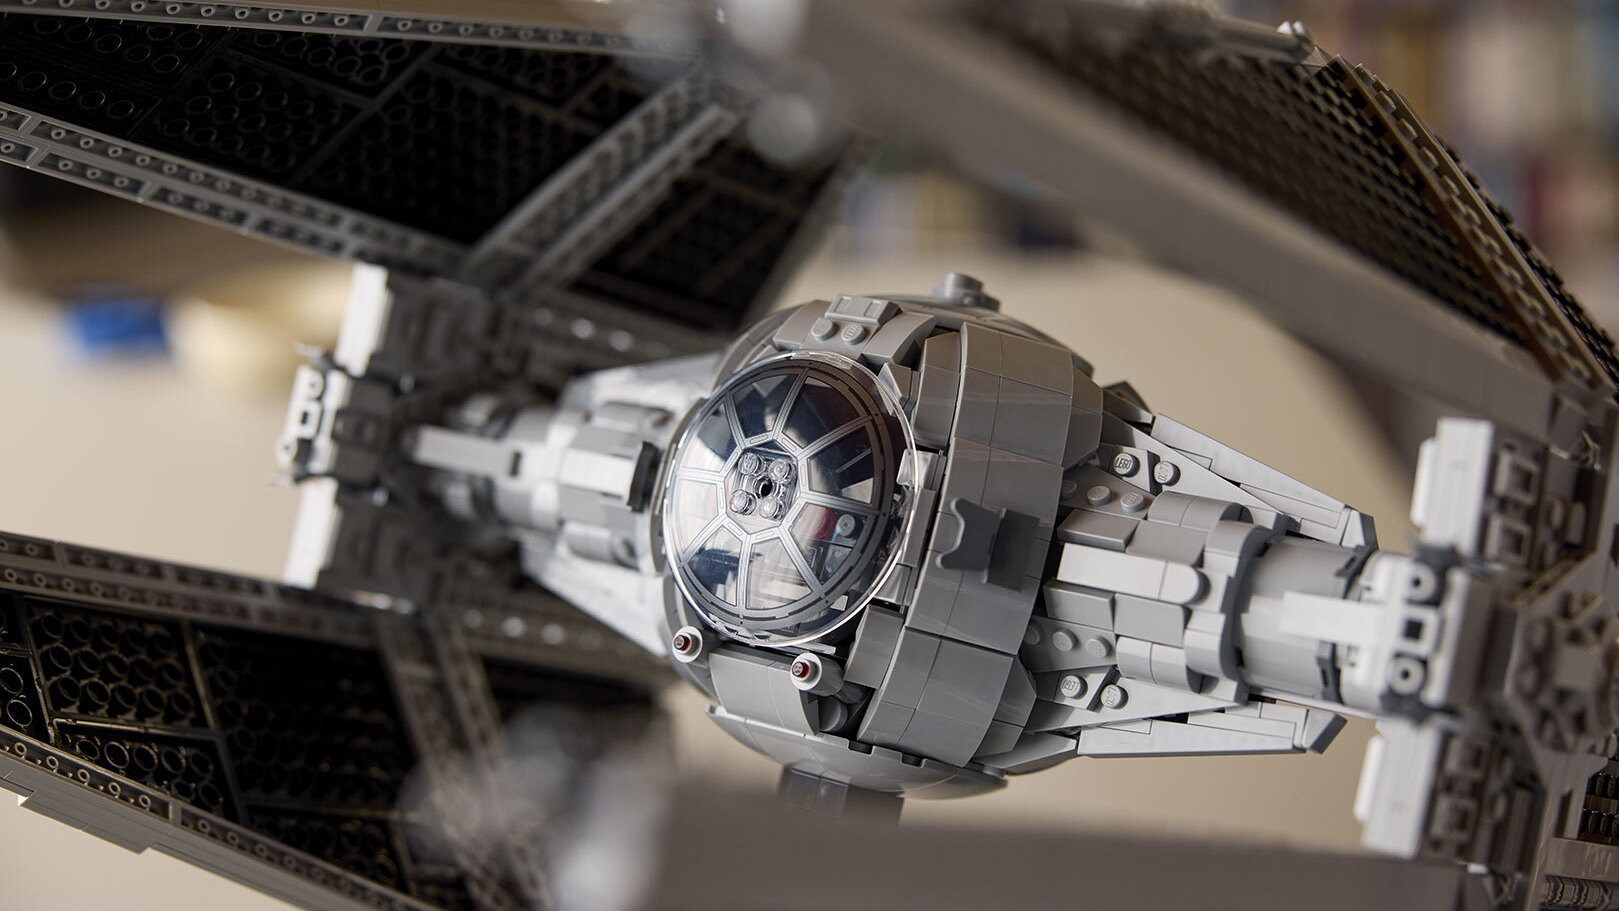 The LEGO Star Wars TIE Interceptor building set, available May 1